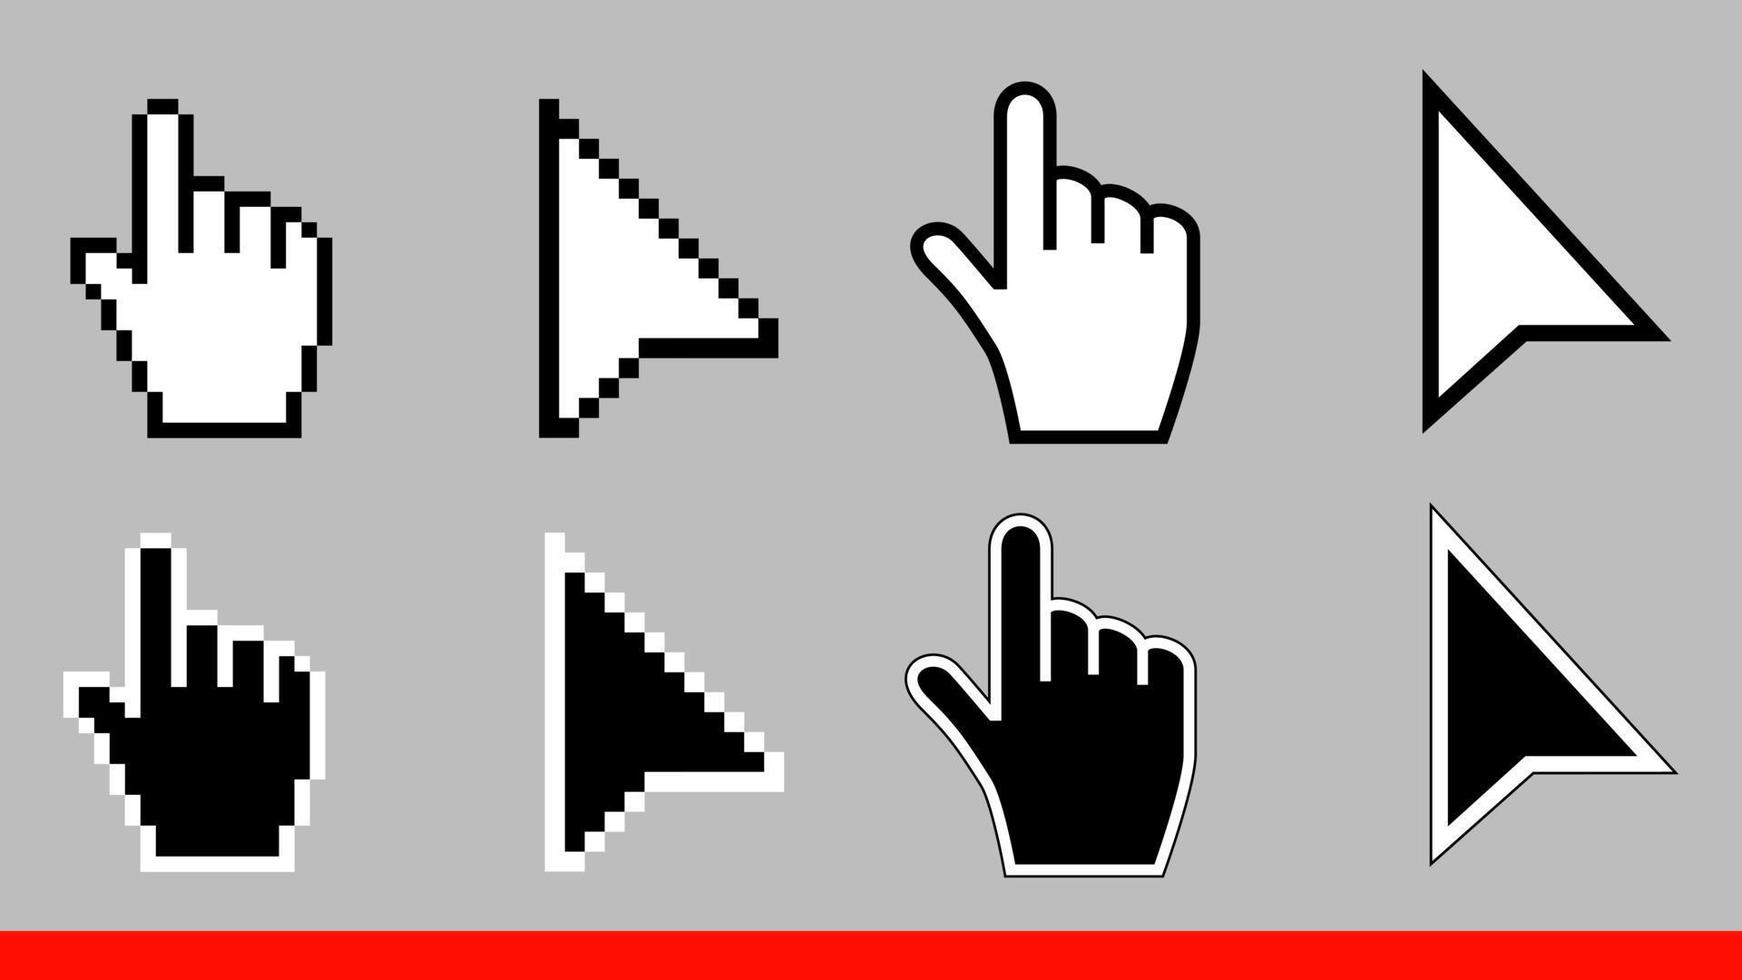 8 Black and white arrow pixel and no pixel mouse hand cursors icon vector illustration set flat style design isolated on white background.